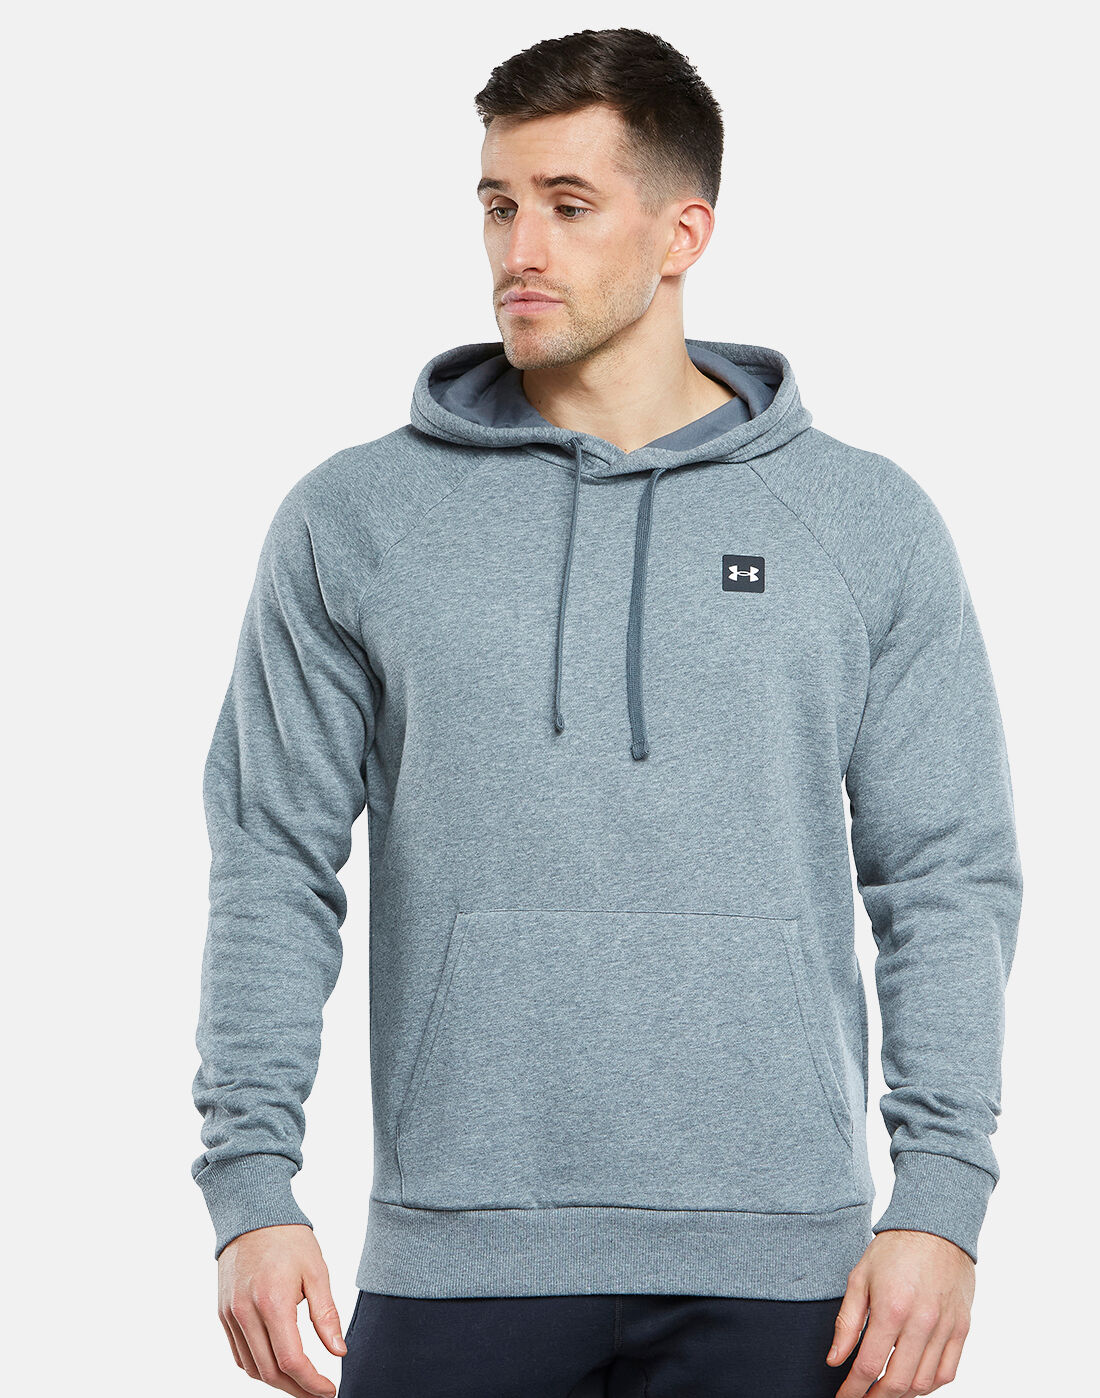 Under Armour Mens Rival Fleece Hoodie Grey Sports Gym Breathable Lightweight 